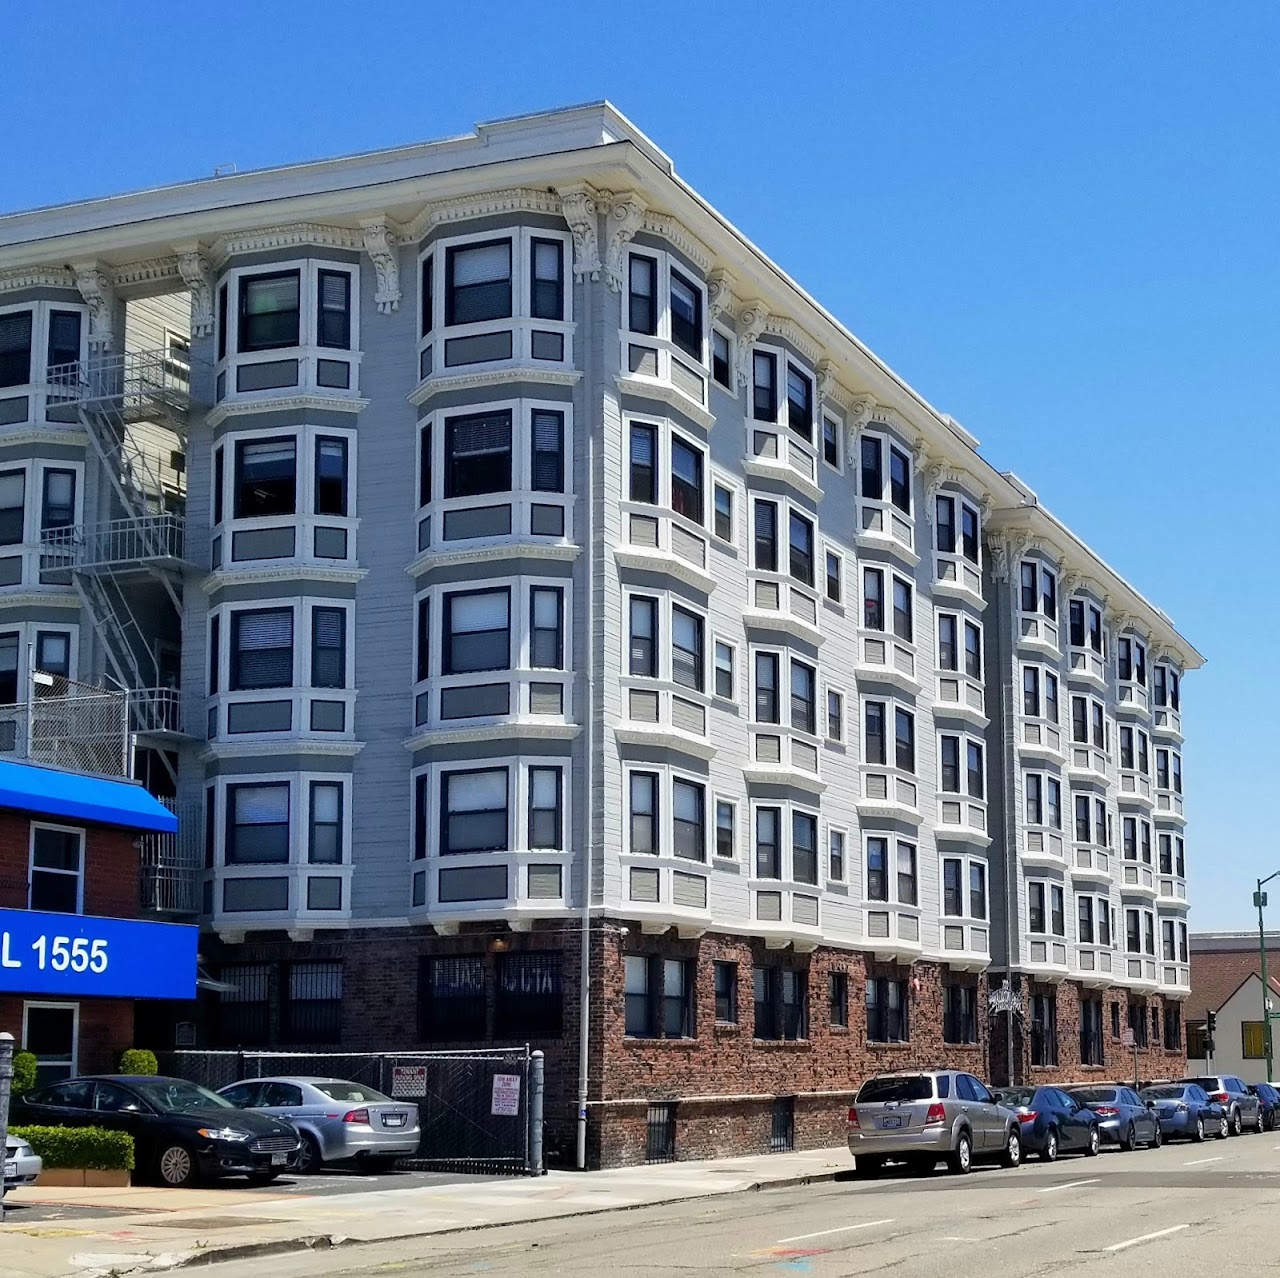 Photo of MADISON PARK APARTMENTS. Affordable housing located at 100 9TH STREET OAKLAND, CA 94607